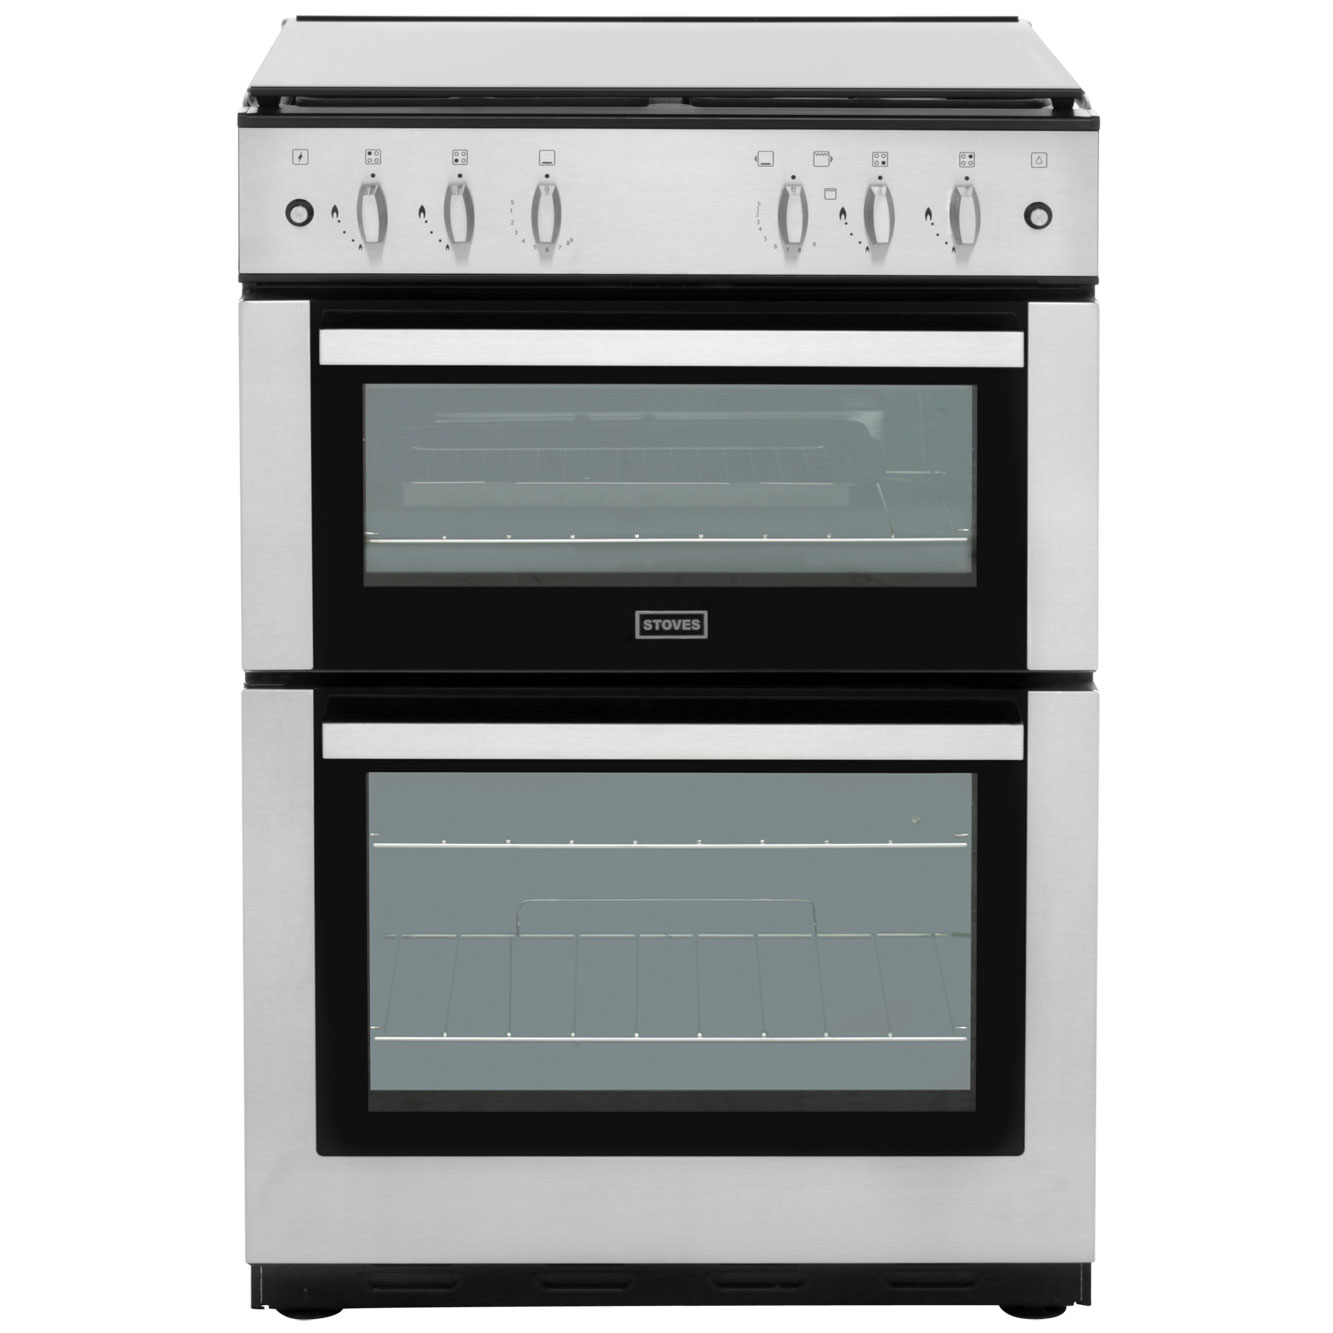 Where can you get the best oven cookers?